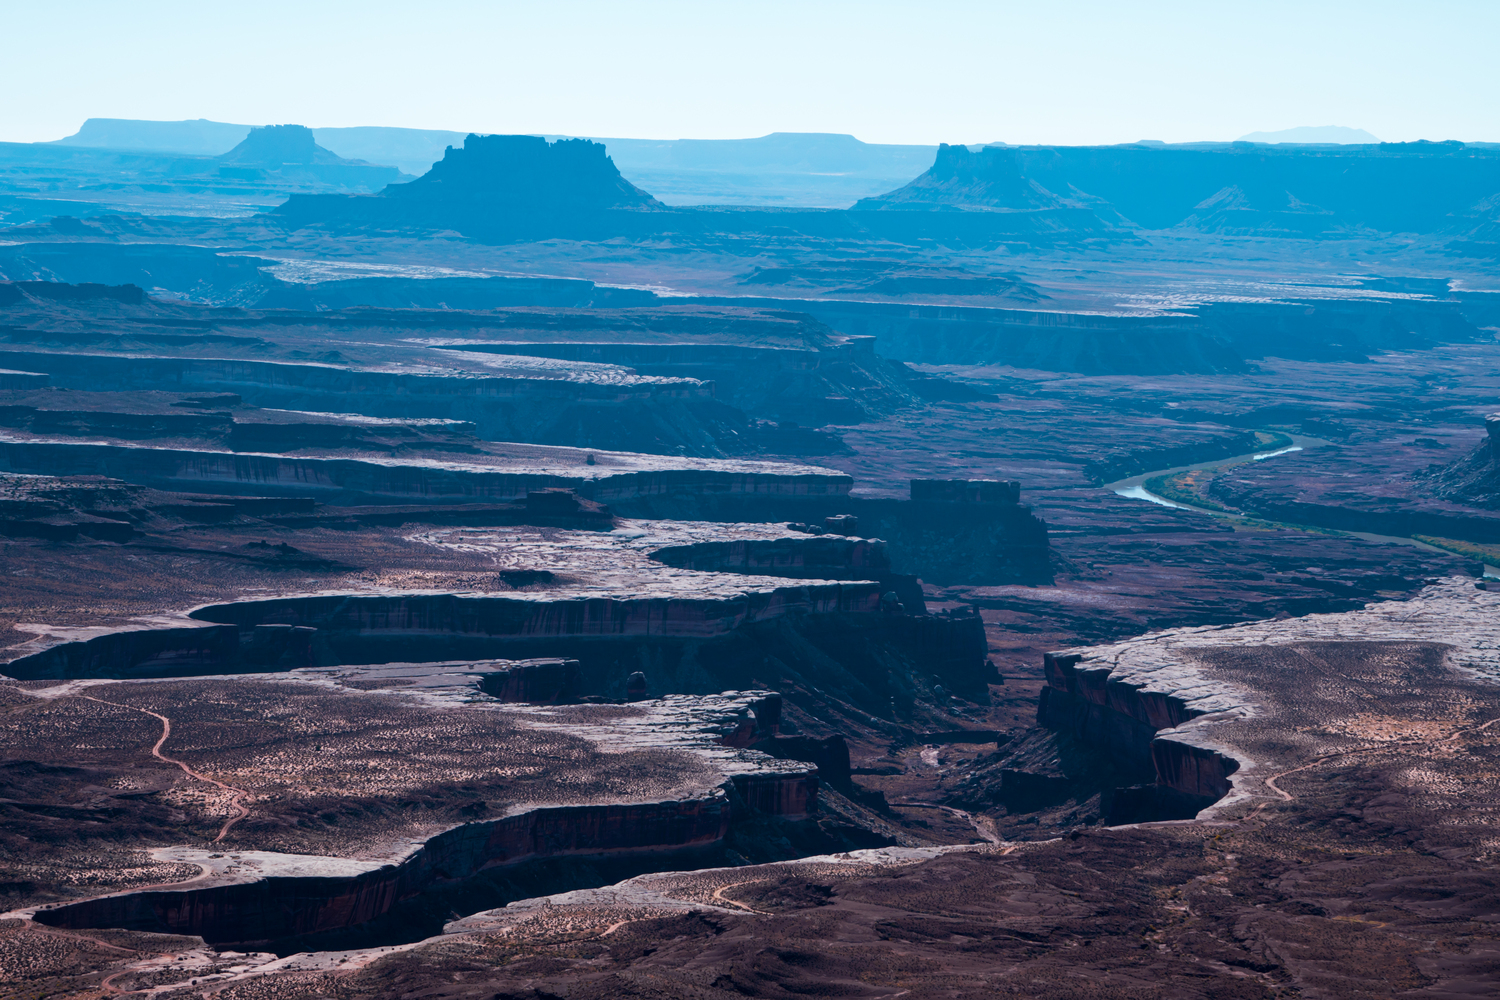 The Green River Overlook in Canyonlands National Park.